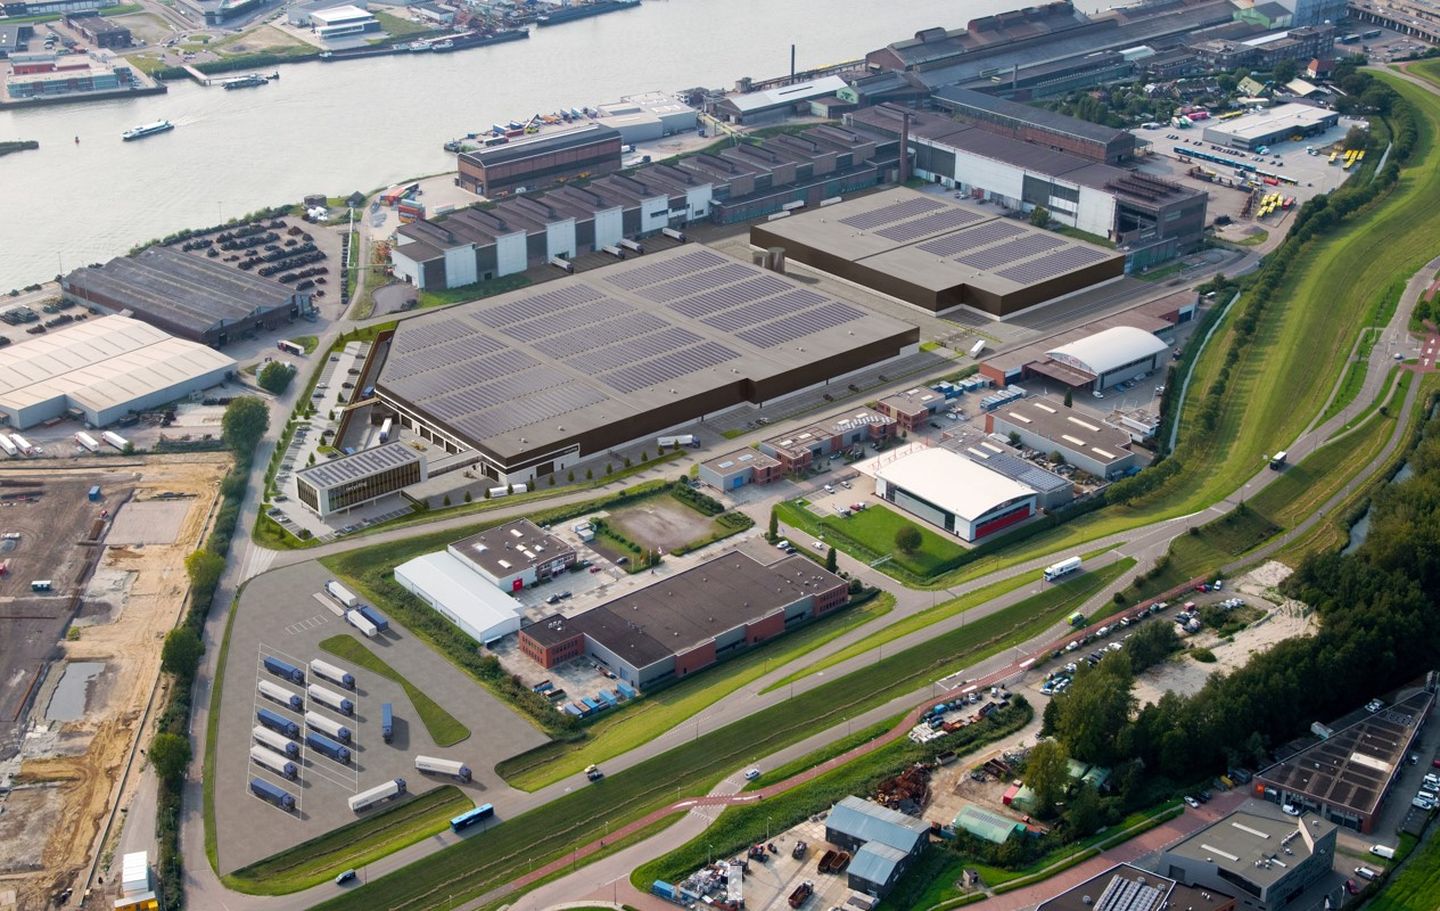 Artist's impression showing an aerial view of Peute Group's planned new site at the terminal of Rotterdam East in Alblasserdam 